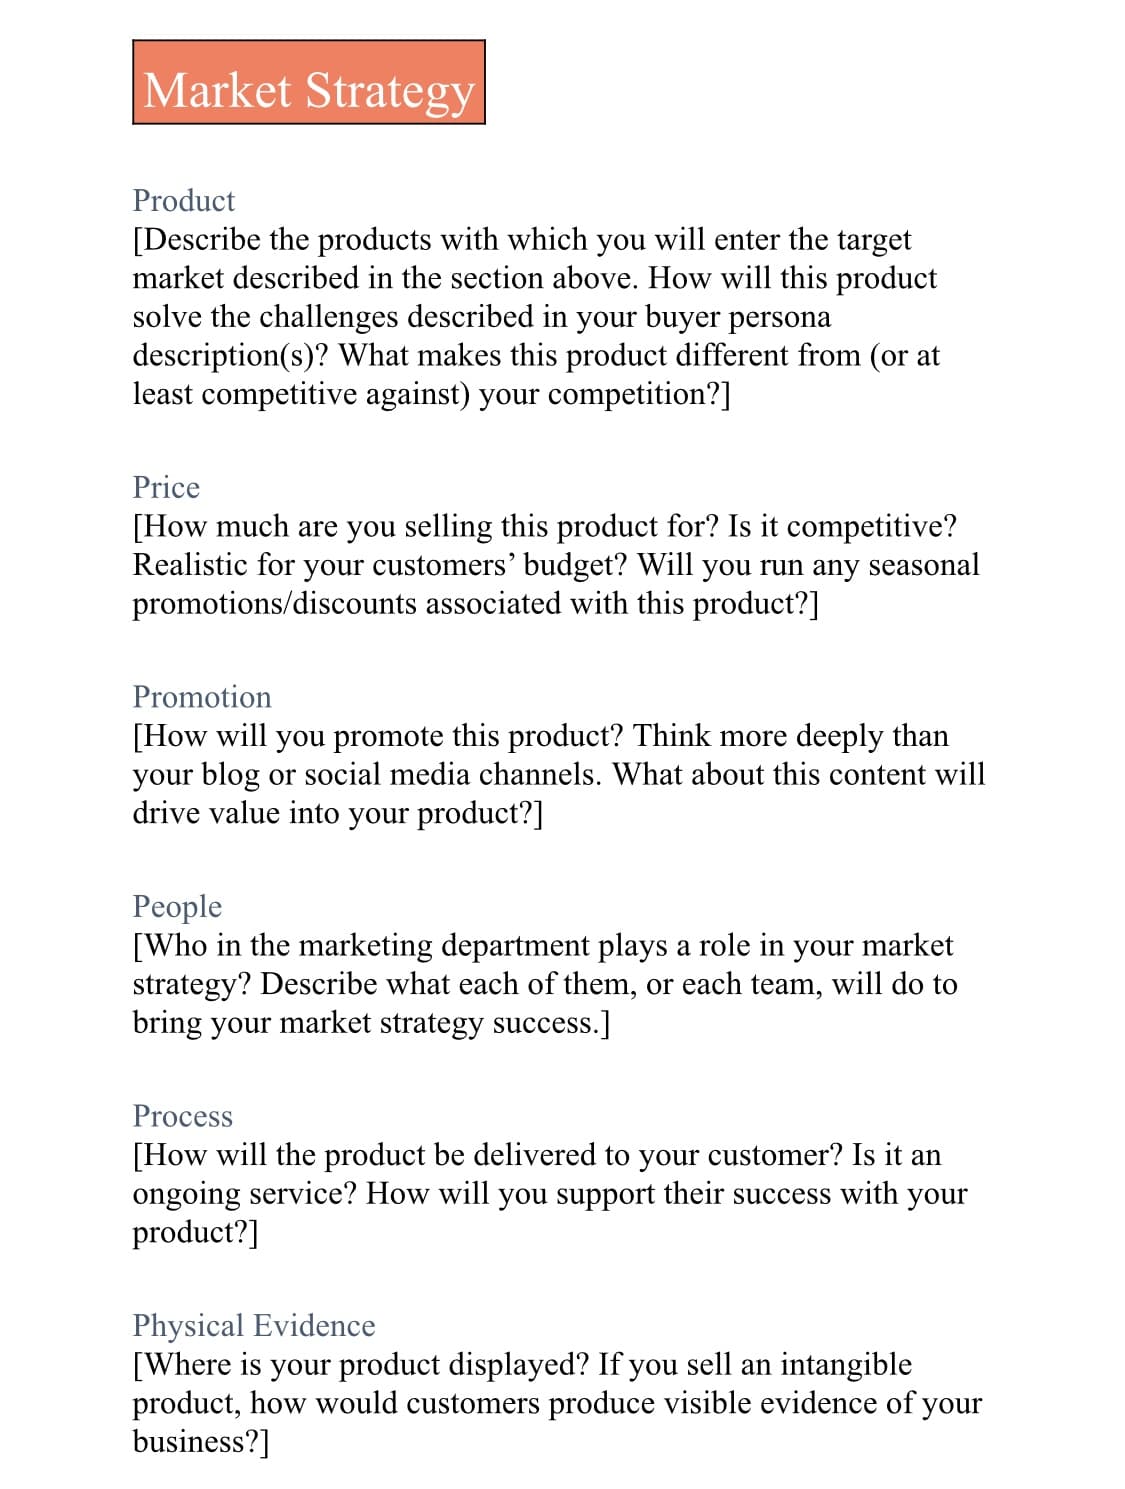 Market Strategy
Product
[Describe the products with which you will enter the target
market described in the section above. How will this product
solve the challenges described in your buyer persona
description(s)? What makes this product different from (or at
least competitive against) your competition?]
Price
[How much are you selling this product for? Is it competitive?
Realistic for your customers' budget? Will you run any seasonal
promotions/discounts associated with this product?]
Promotion
[How will you promote this product? Think more deeply than
your blog or social media channels. What about this content will
drive value into your product?]
People
[Who in the marketing department plays a role in your market
strategy? Describe what each of them, or each team, will do to
bring your market strategy success.]
Process
[How will the product be delivered to your customer? Is it an
ongoing service? How will you support their success with your
product?]
Physical Evidence
[Where is your product displayed? If you sell an intangible
product, how would customers produce visible evidence of your
business?]